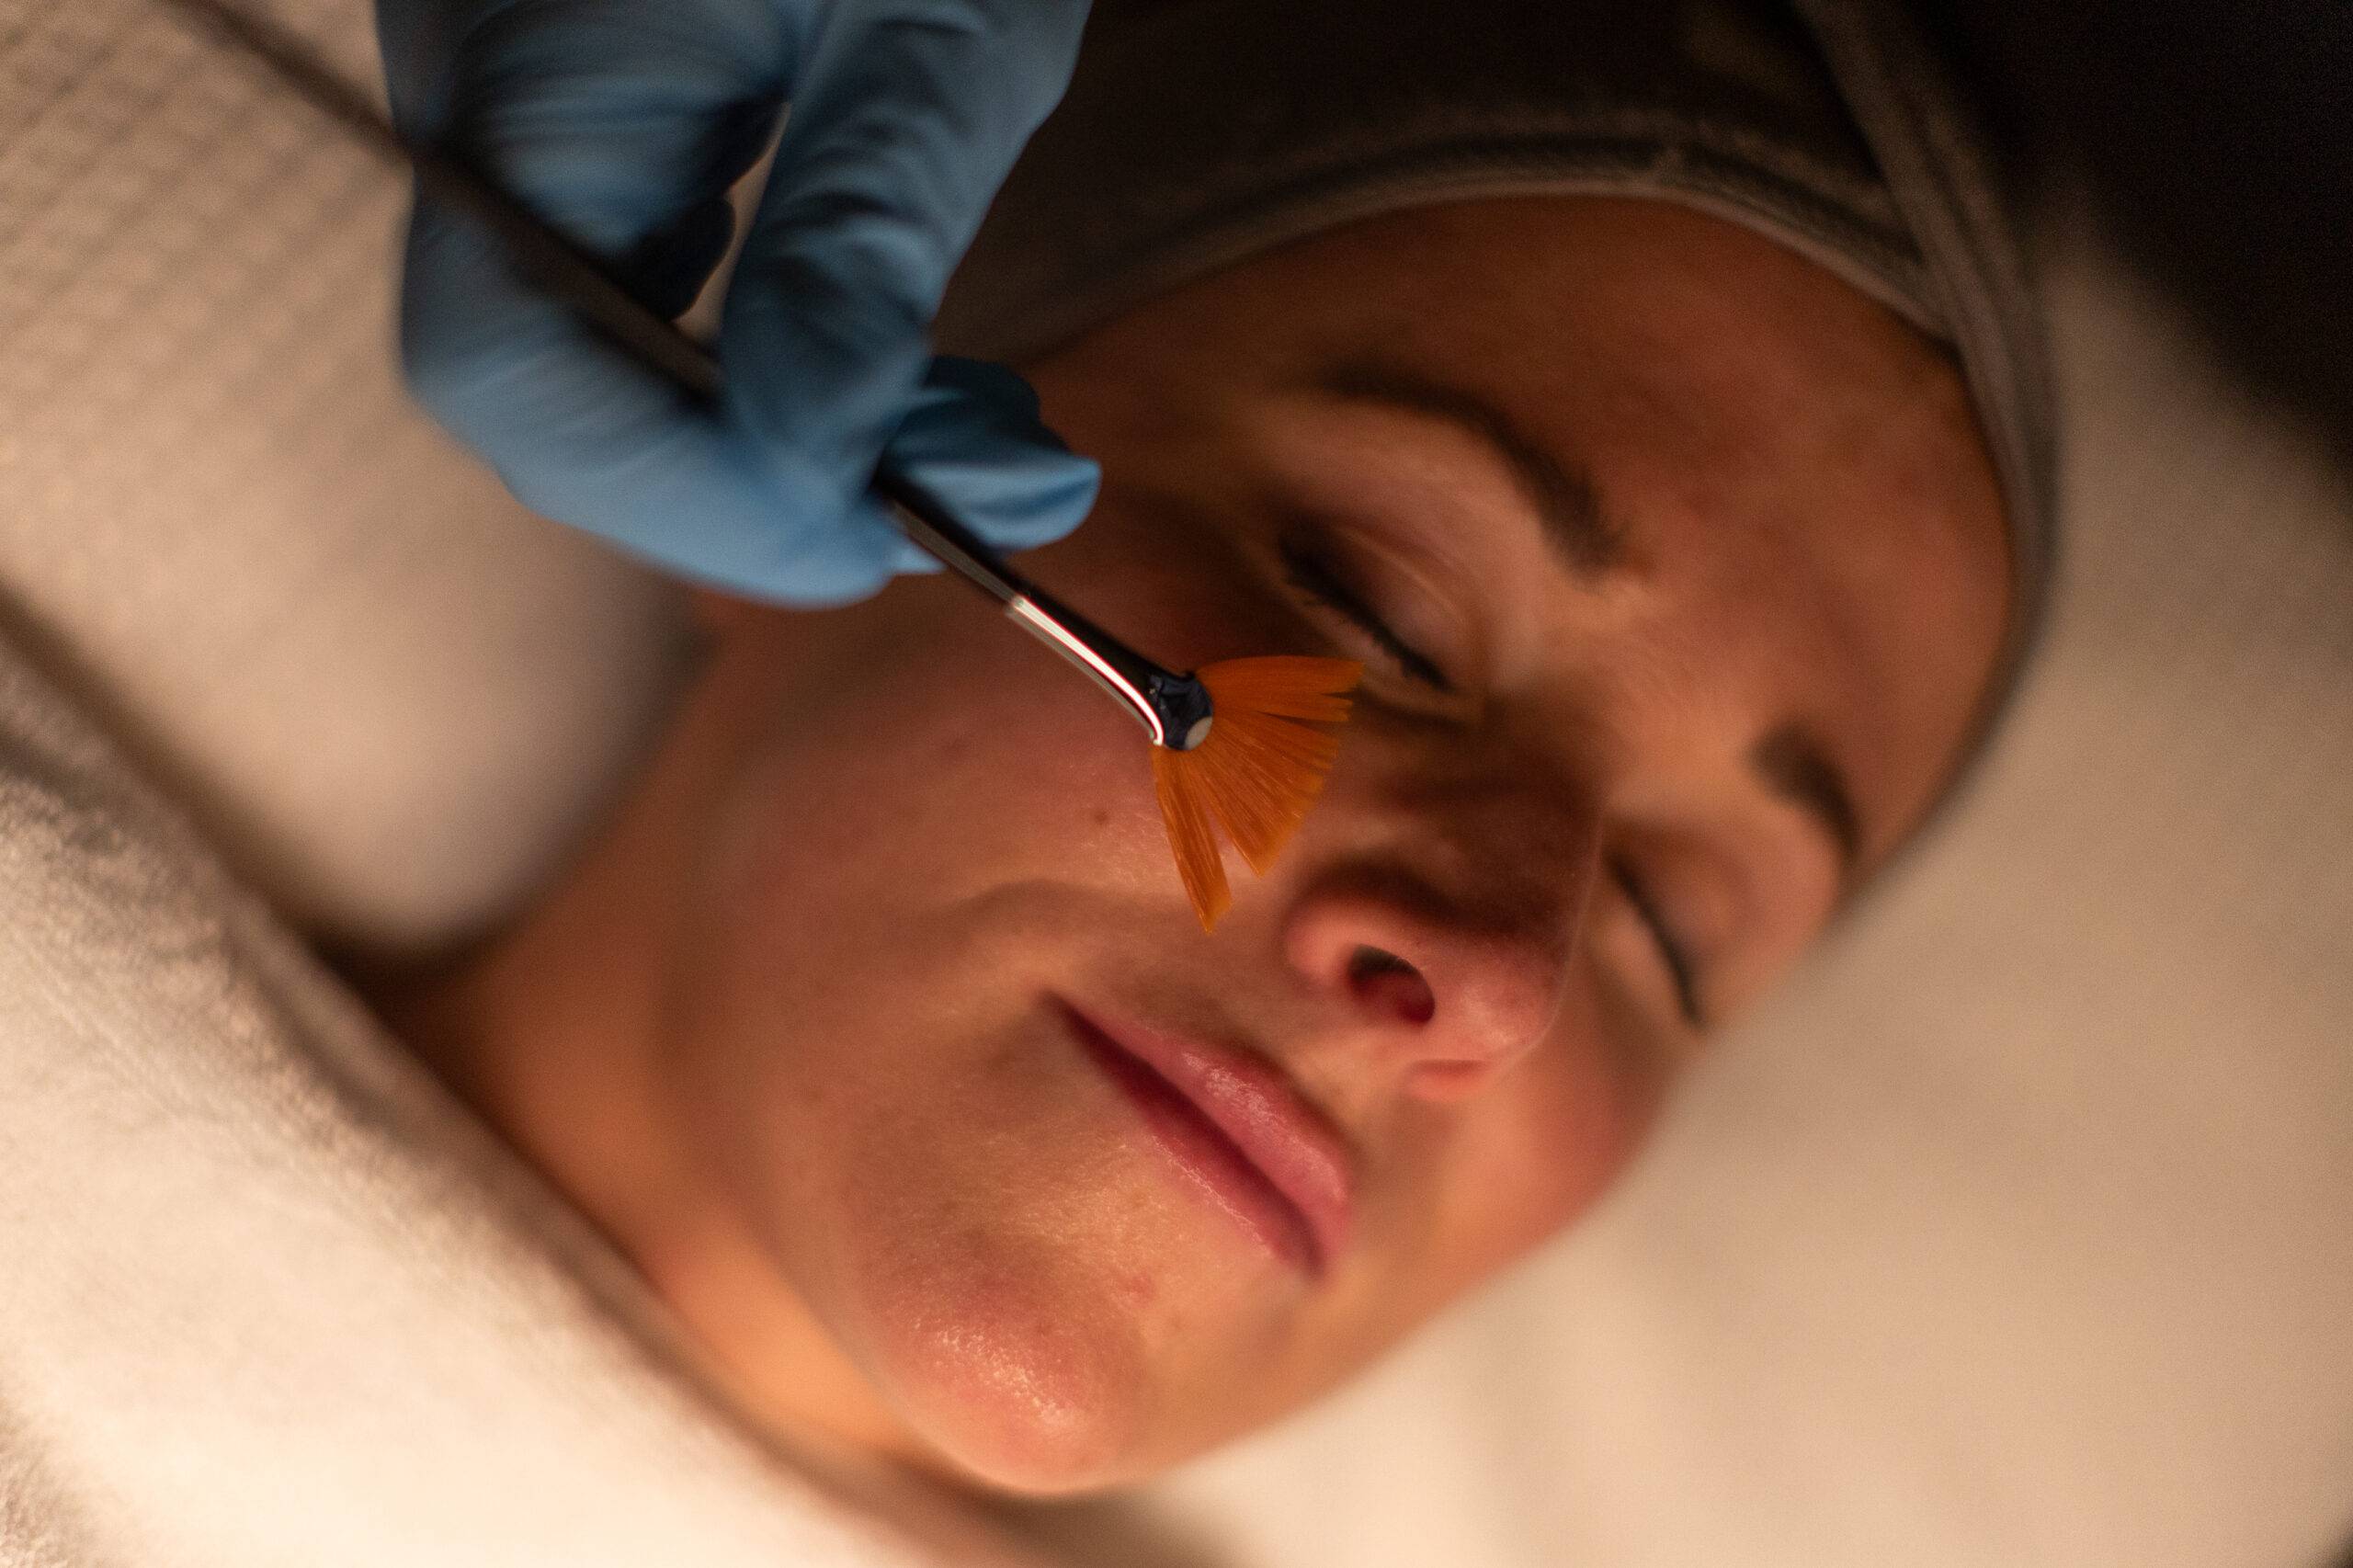 A woman receiving a skin treatment with a brush applying a product under her eyes, wearing a headband and lying down, as a person wearing blue gloves tends to her skin.